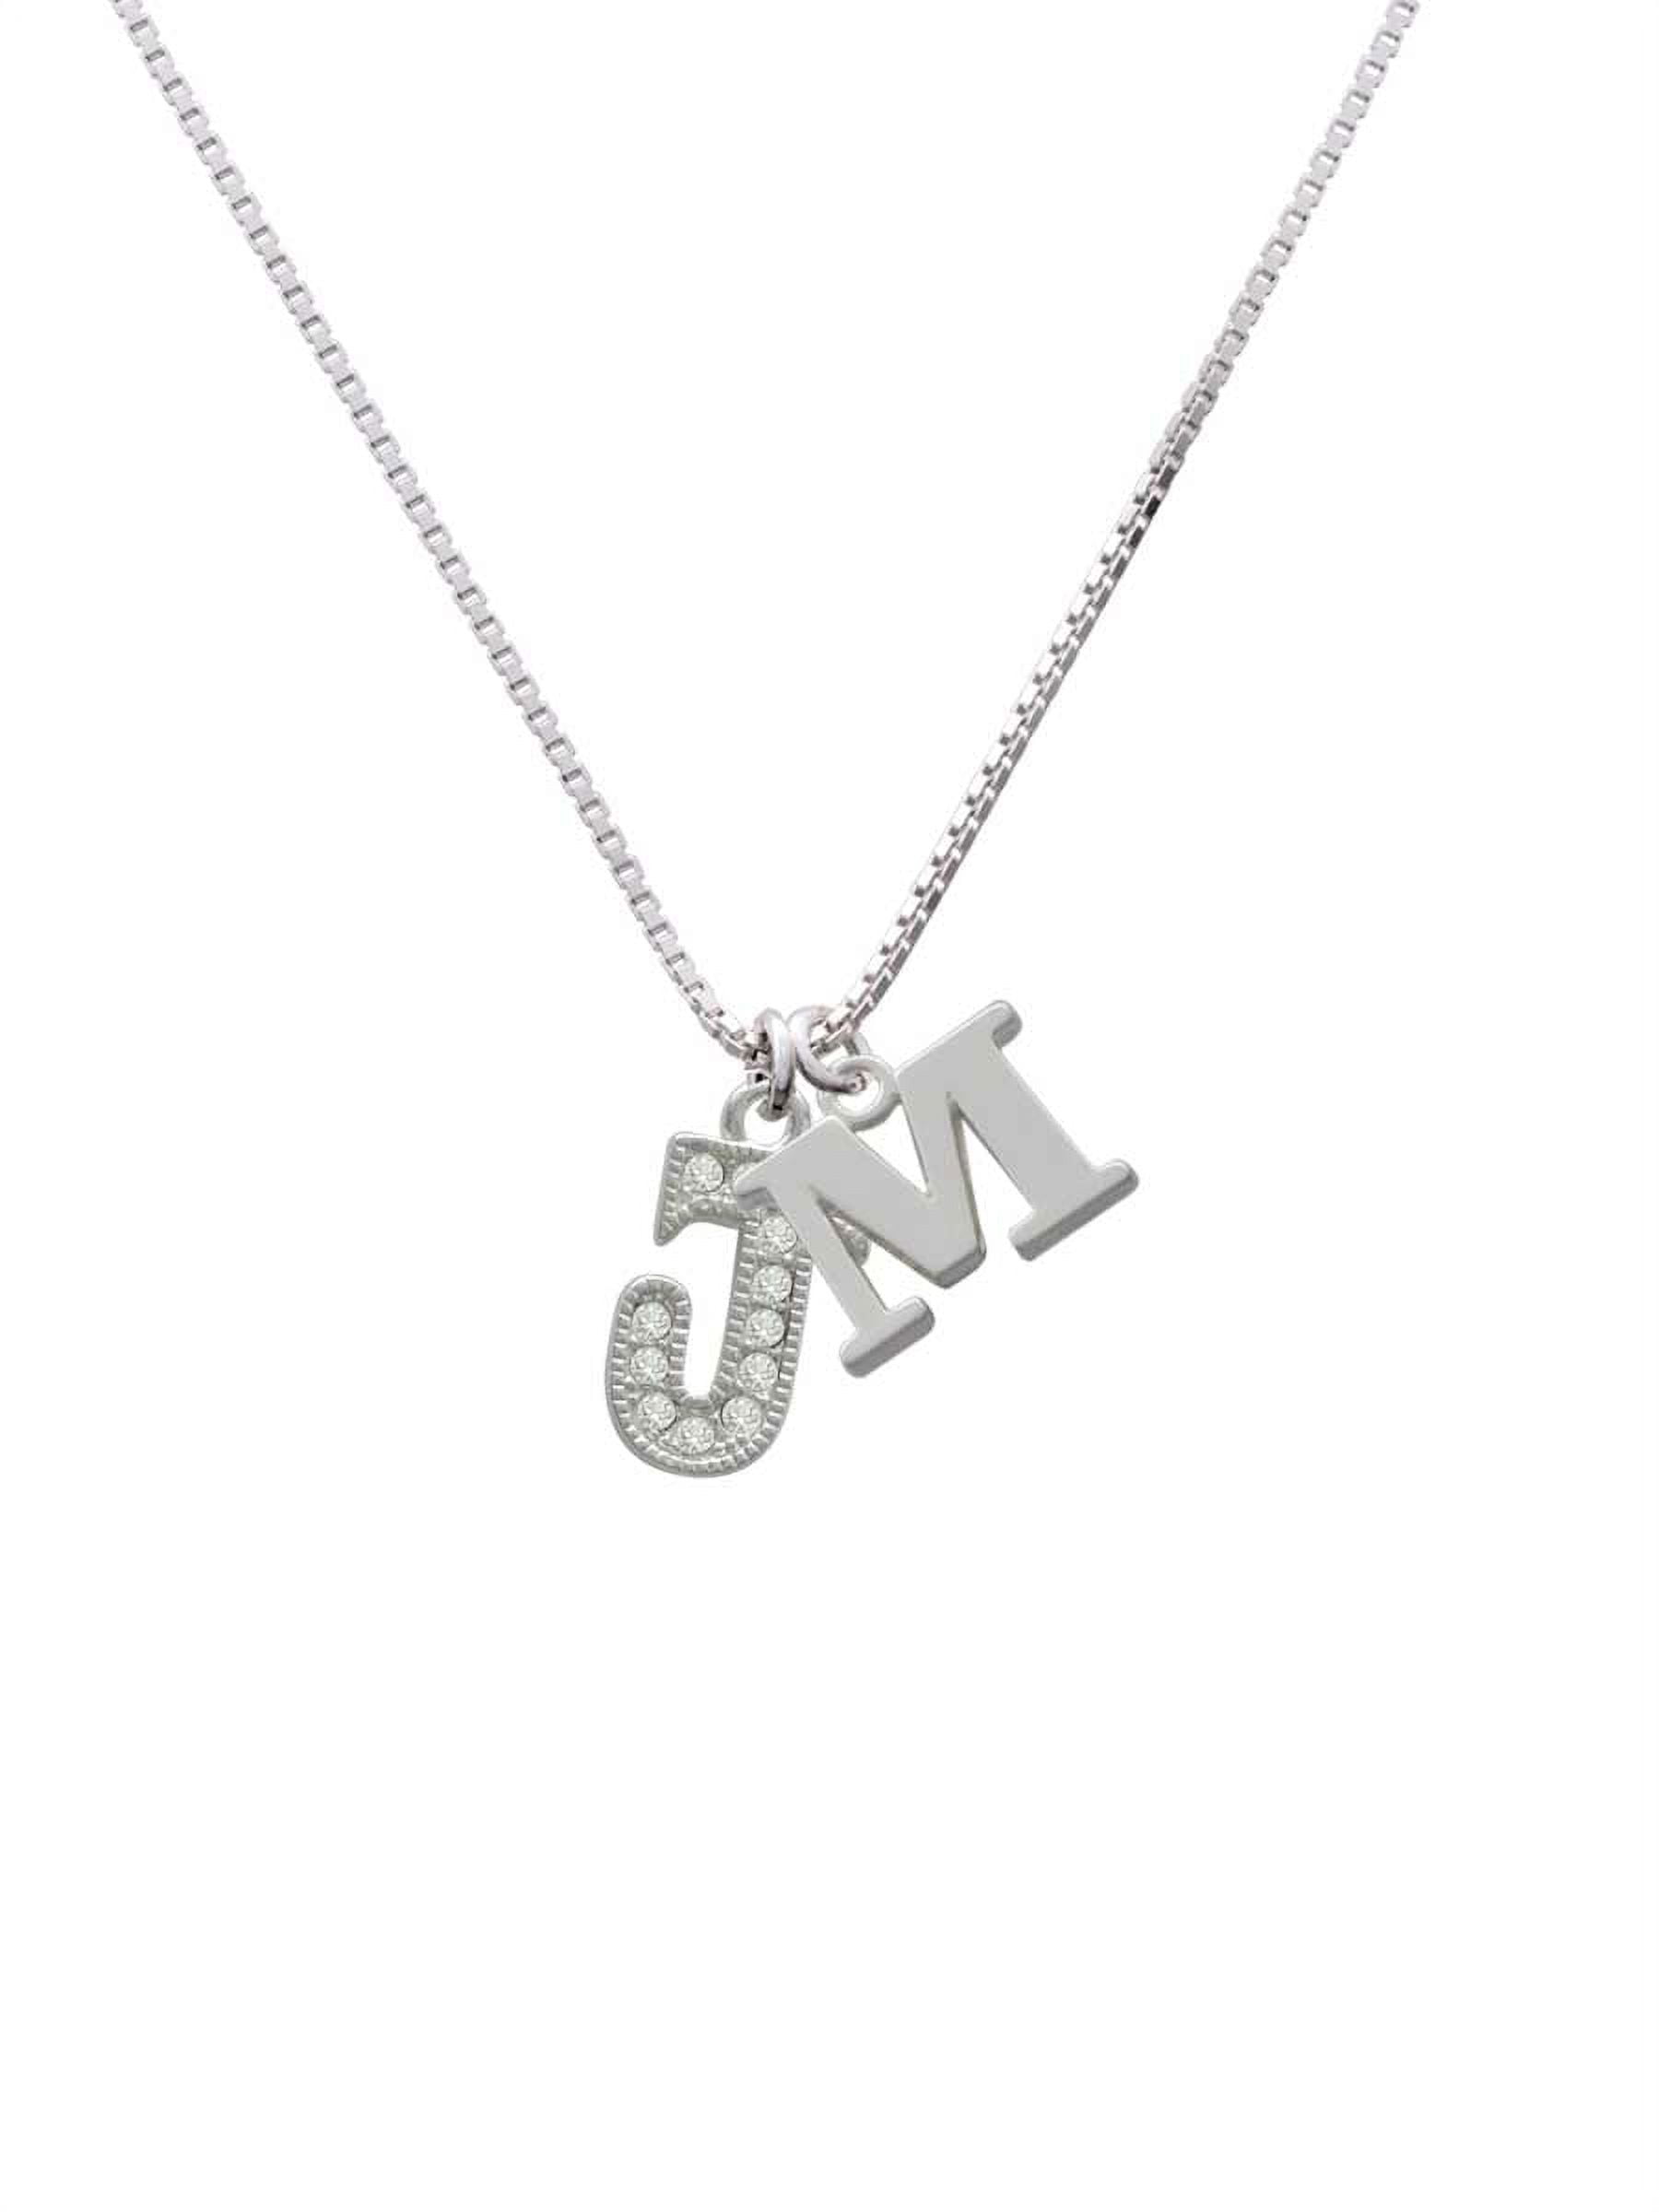 KARAMNATH M Silver Alphabet Chain, M Silver Letter Ring And Single Line  Beads Necklace for women